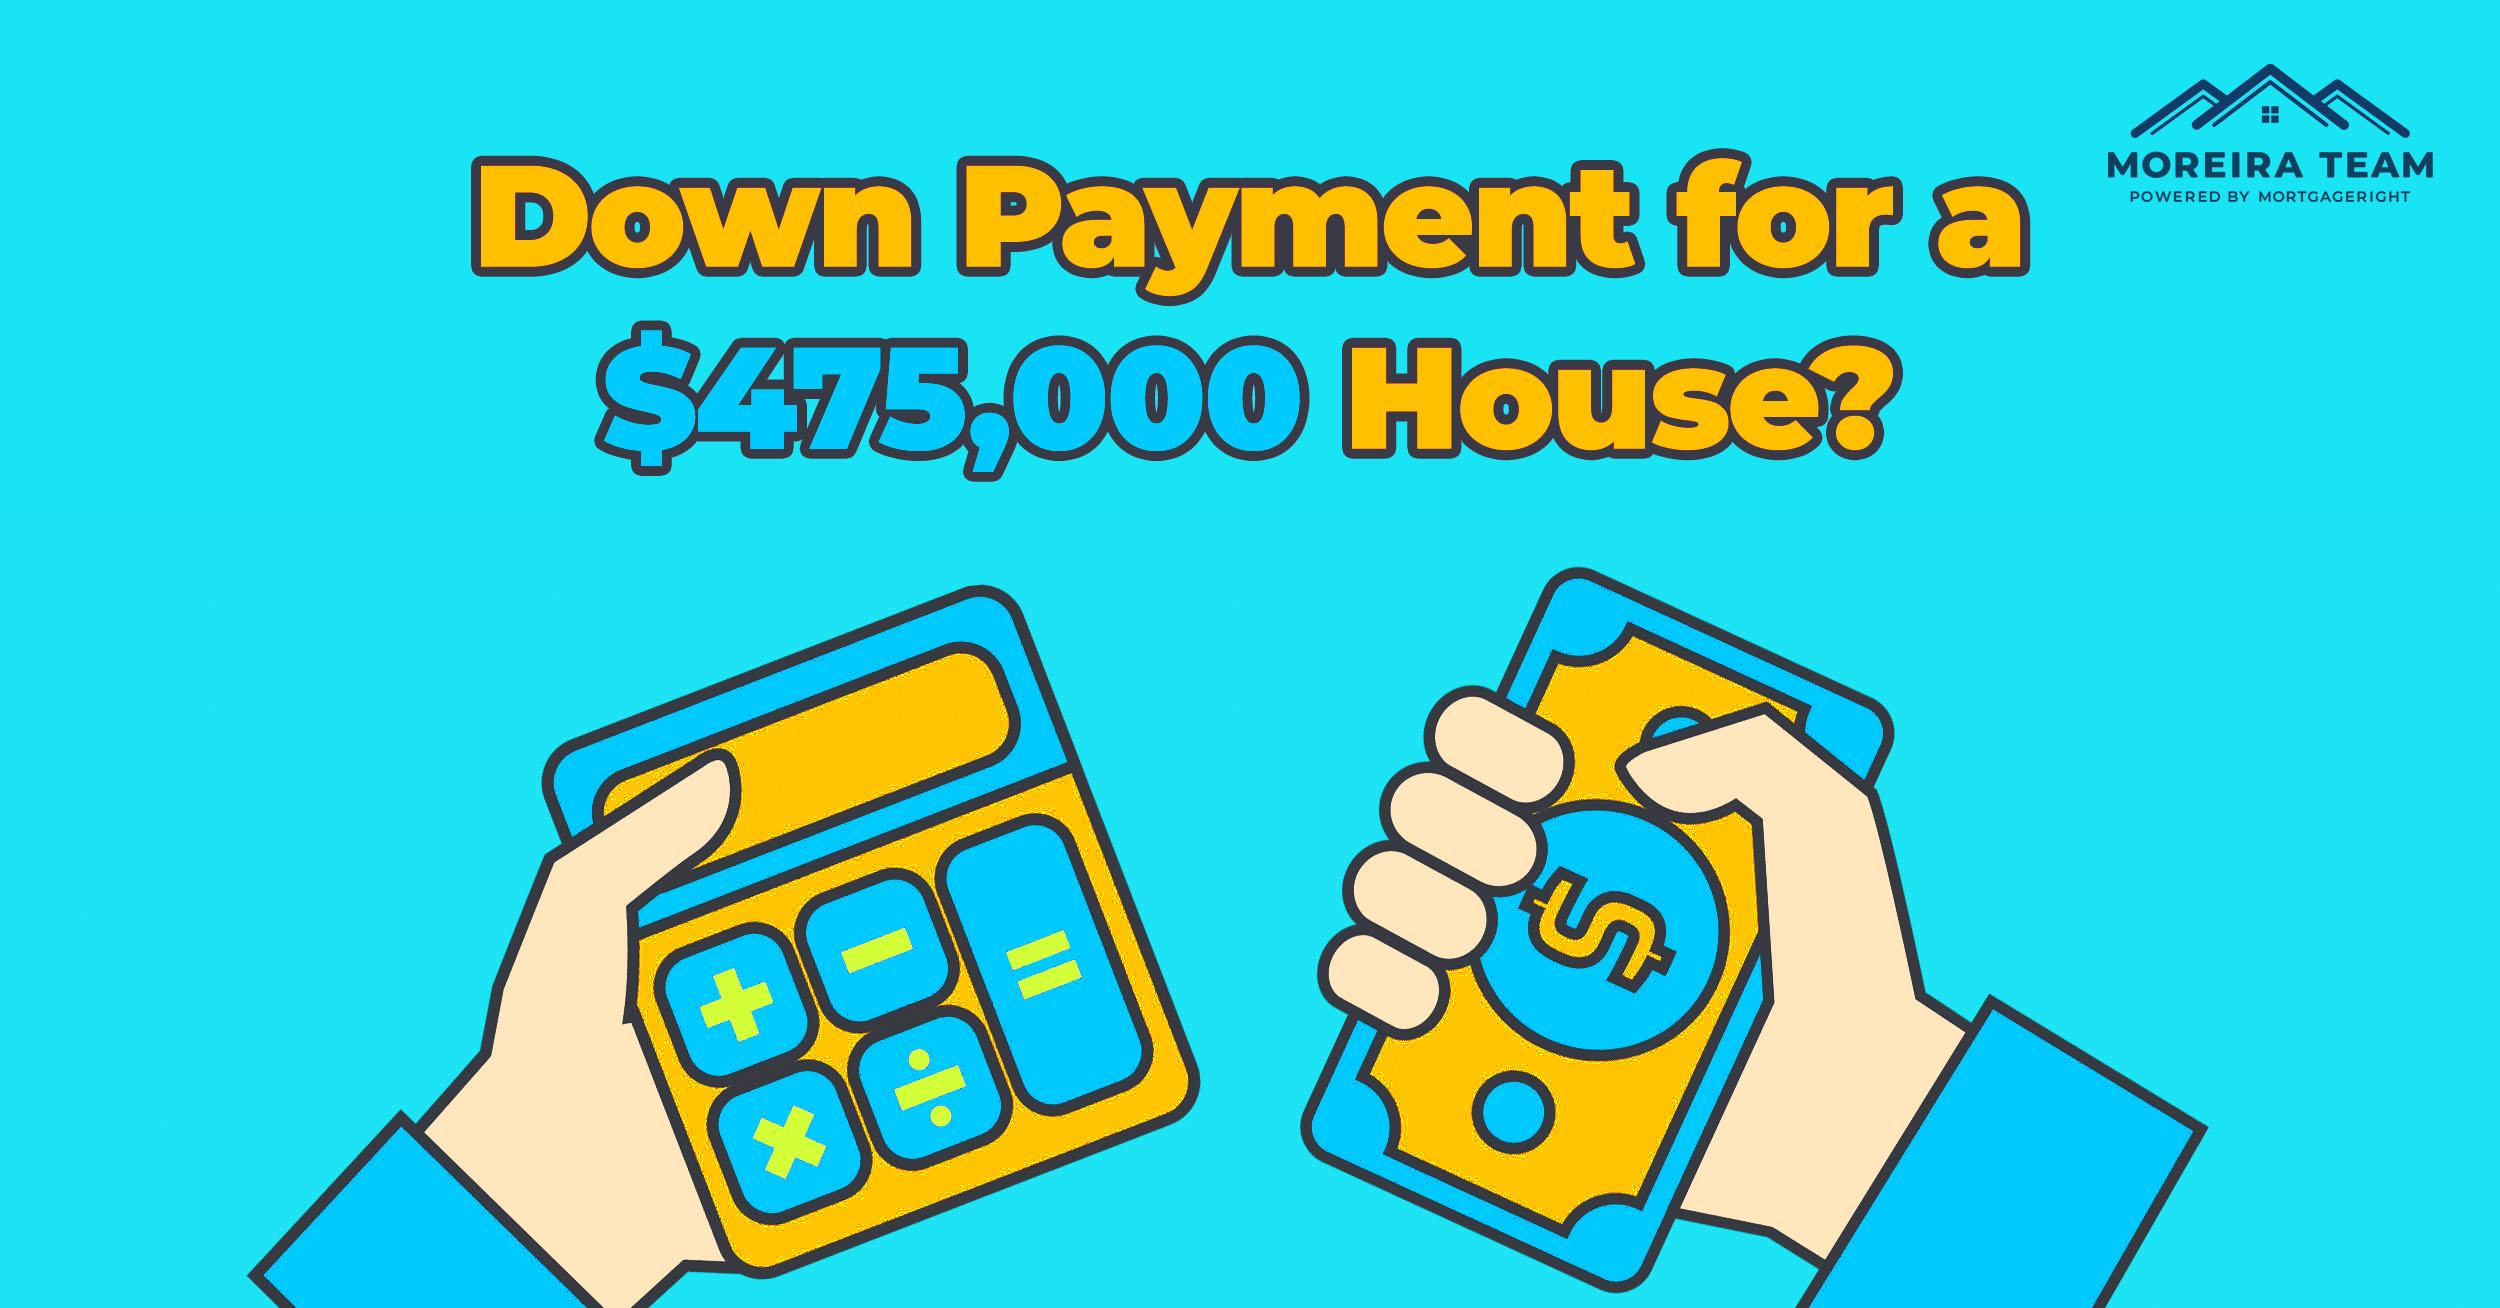 How Much is the Down Payment on a $475,000 Home?